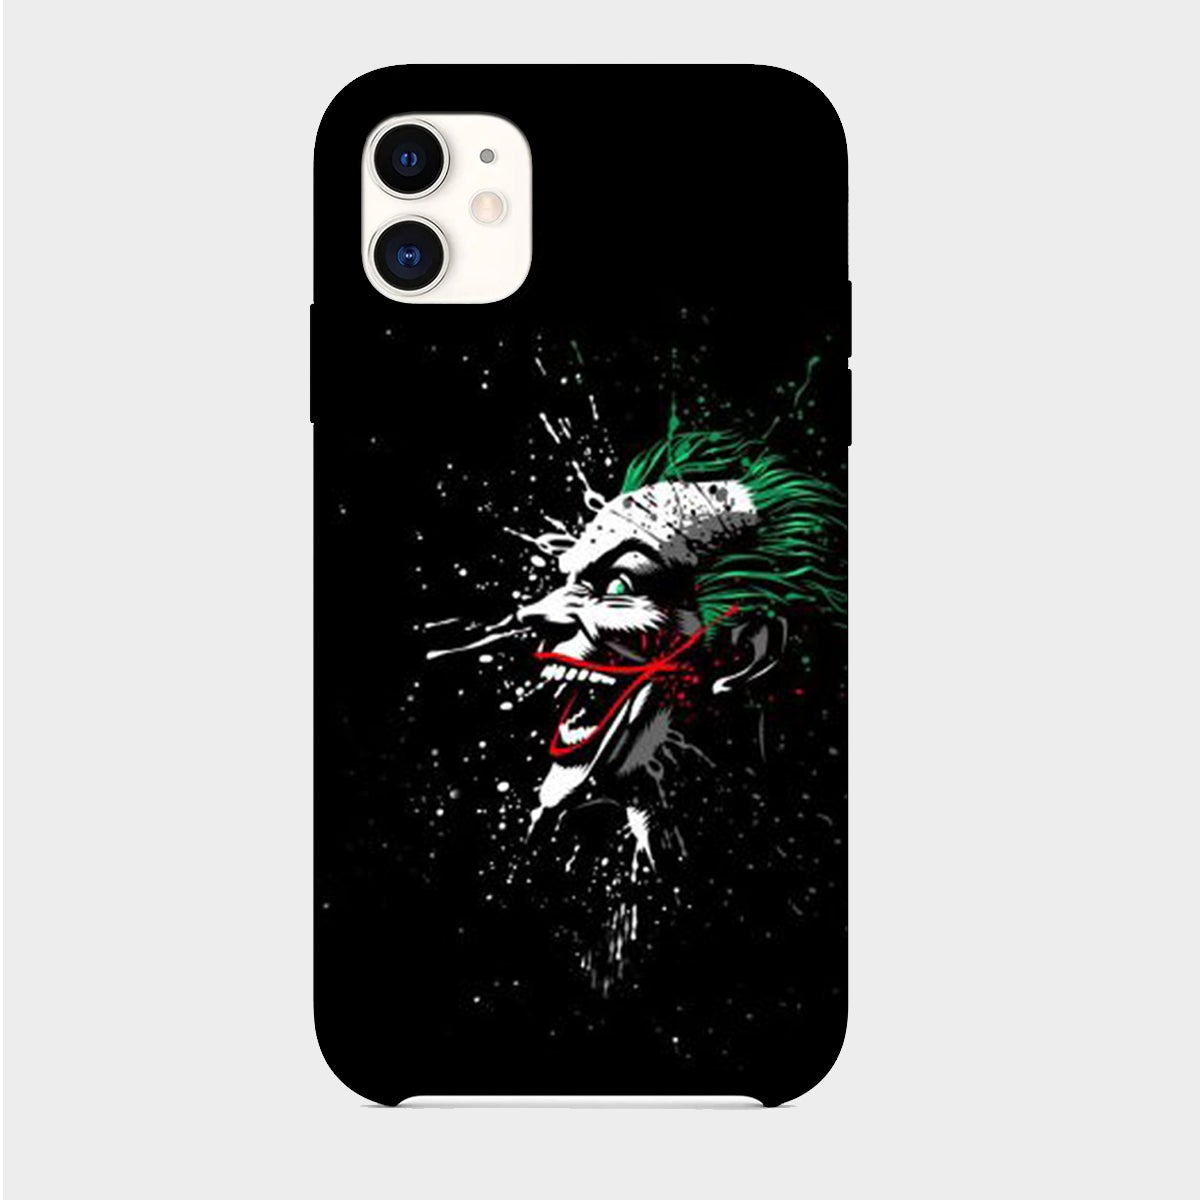 The Joker - Laughing - Mobile Phone Cover - Hard Case